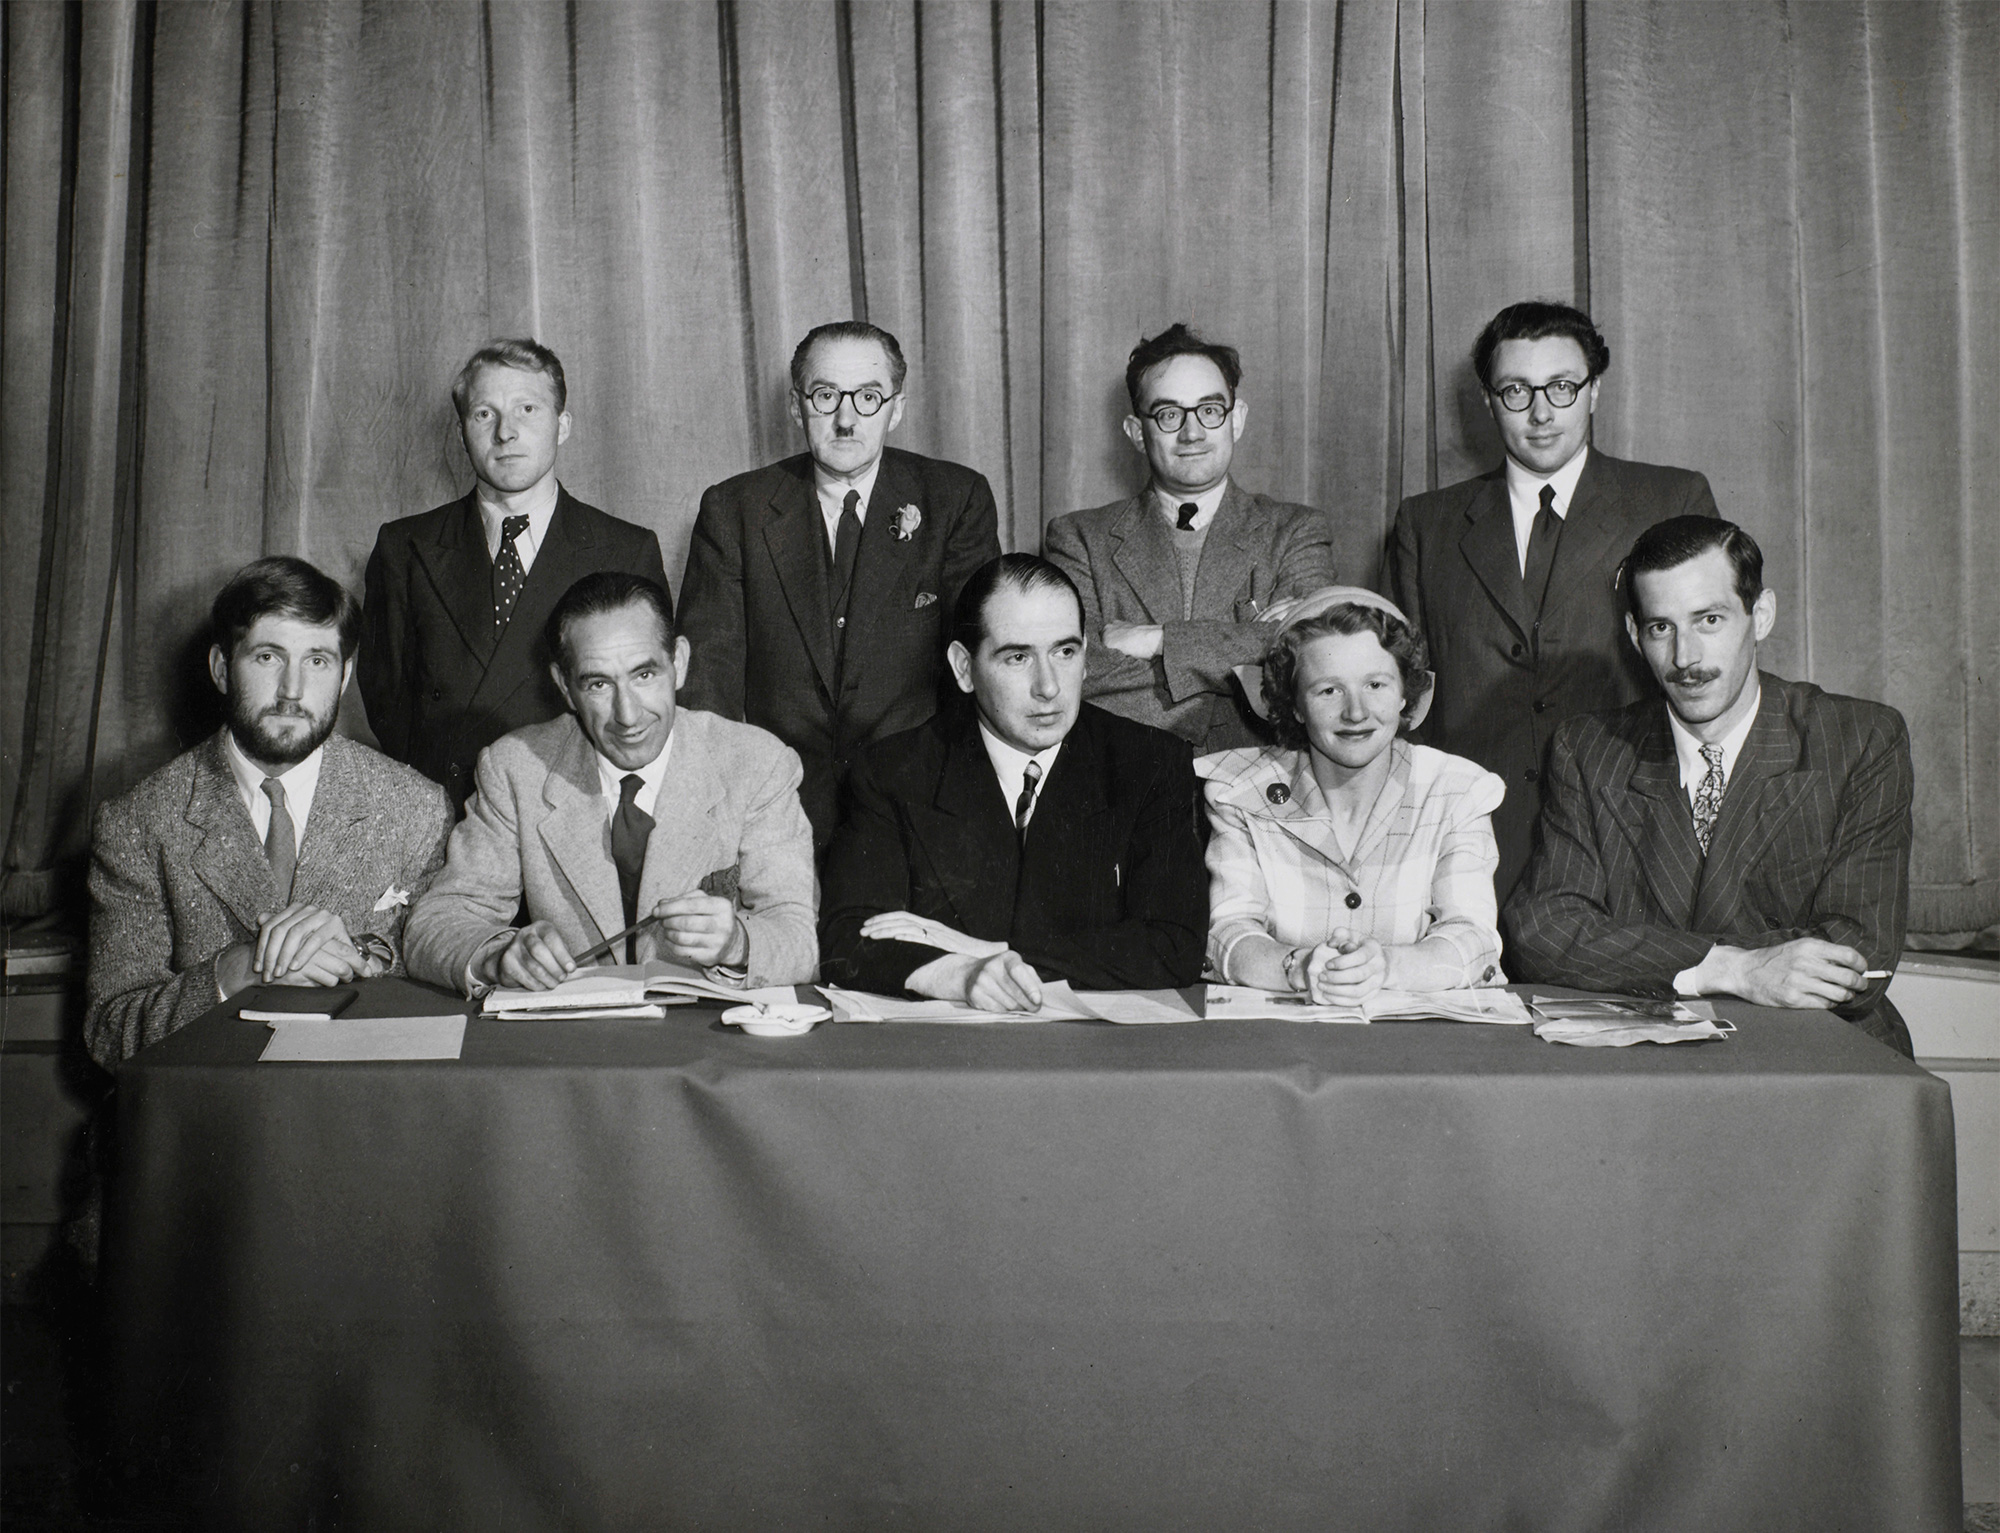 Photograph of the first IPPA council, courtesy of Christopher Ashe